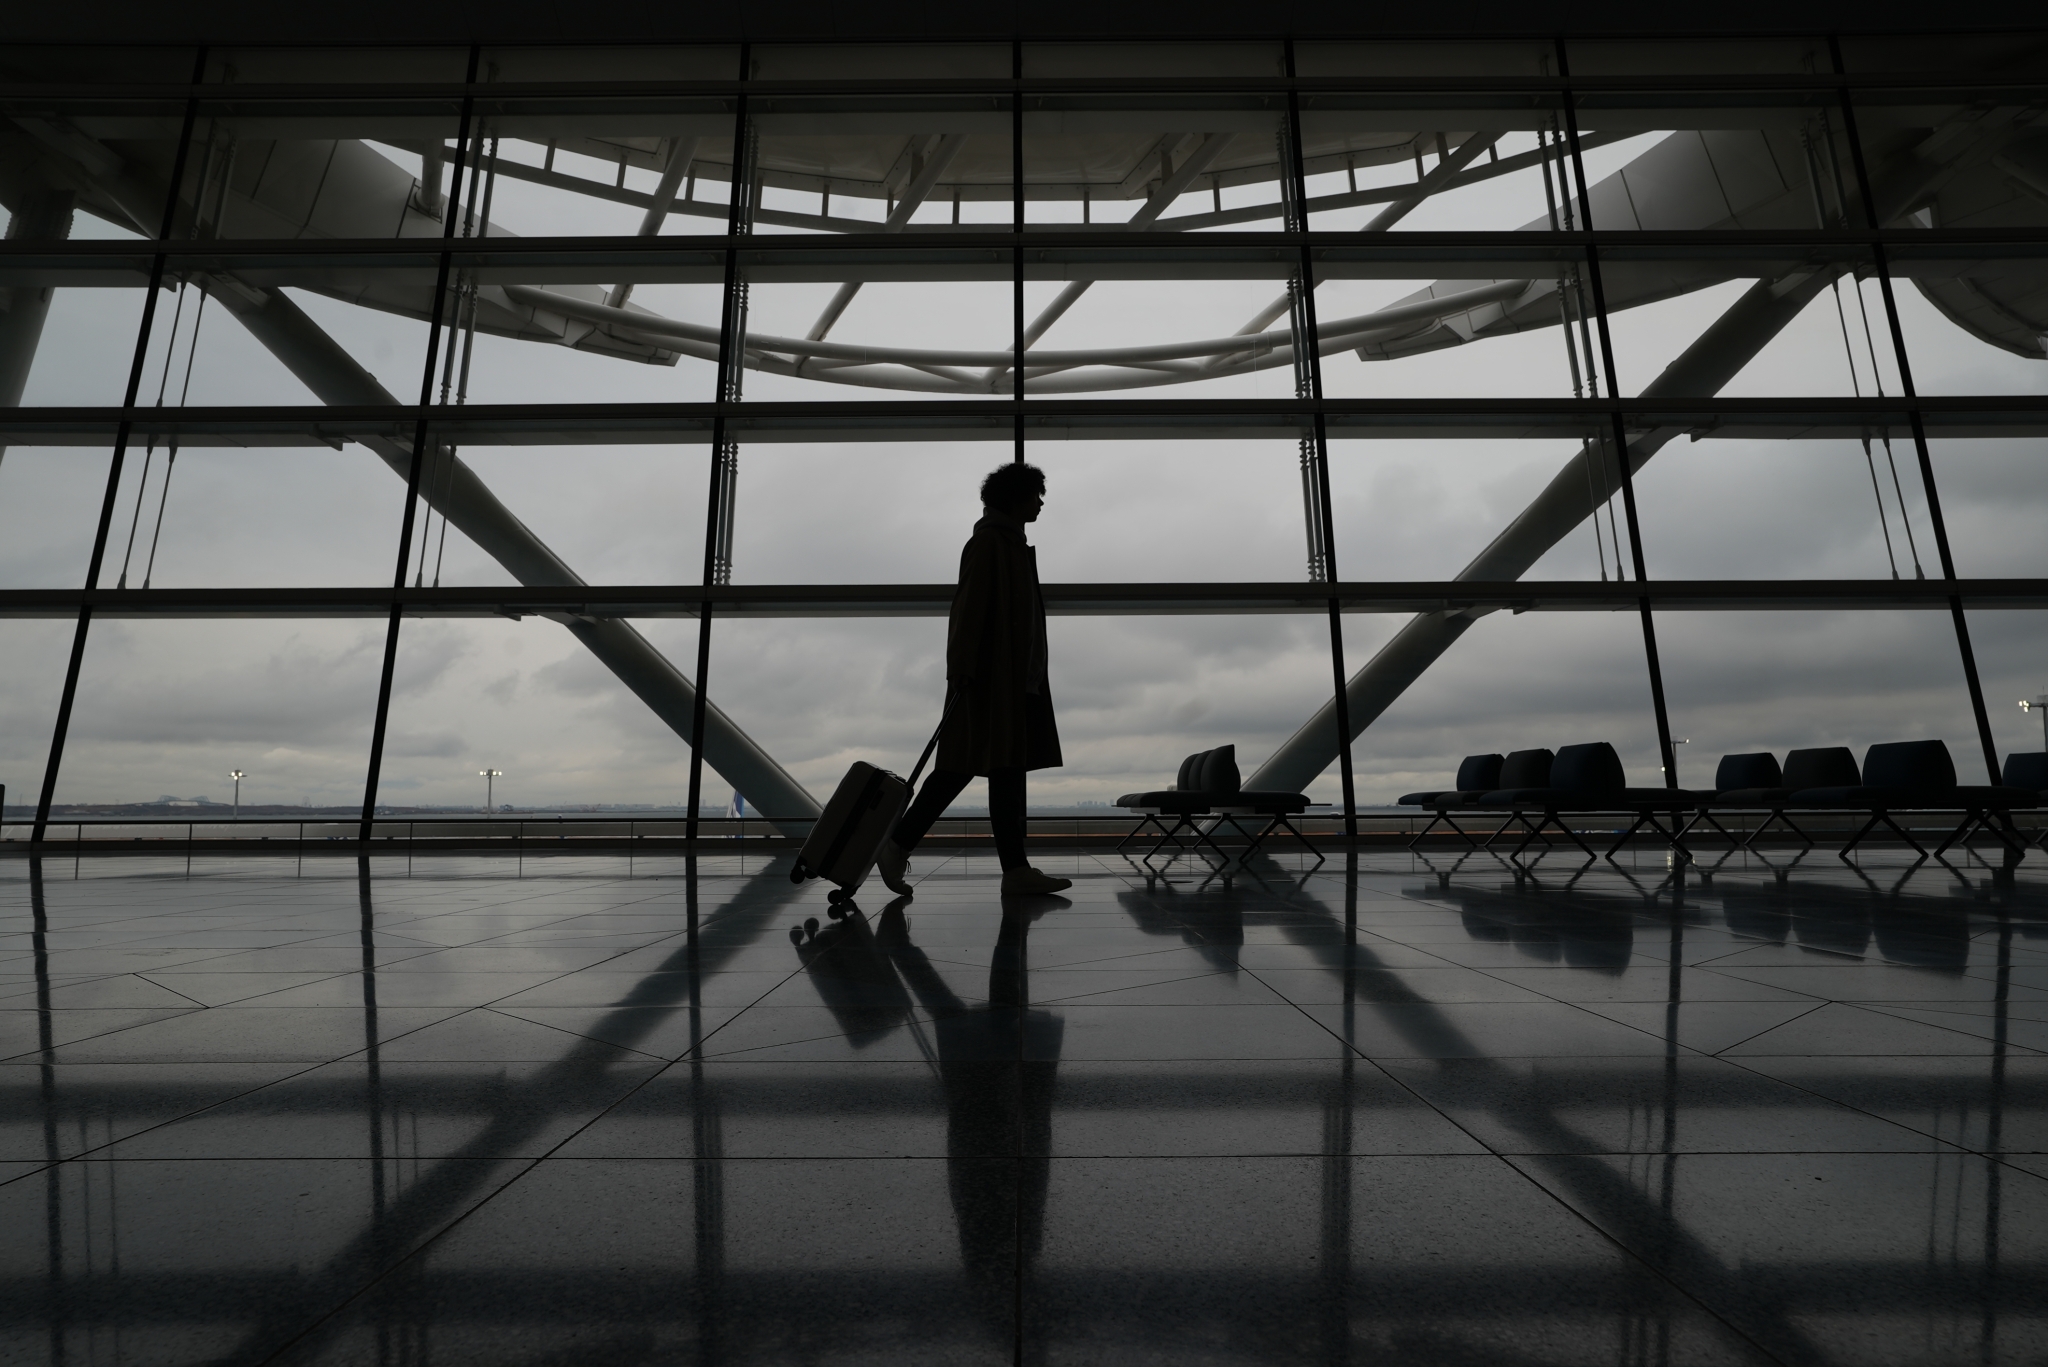 Silhouette of a person wheeling a suitcase through a large glass airport